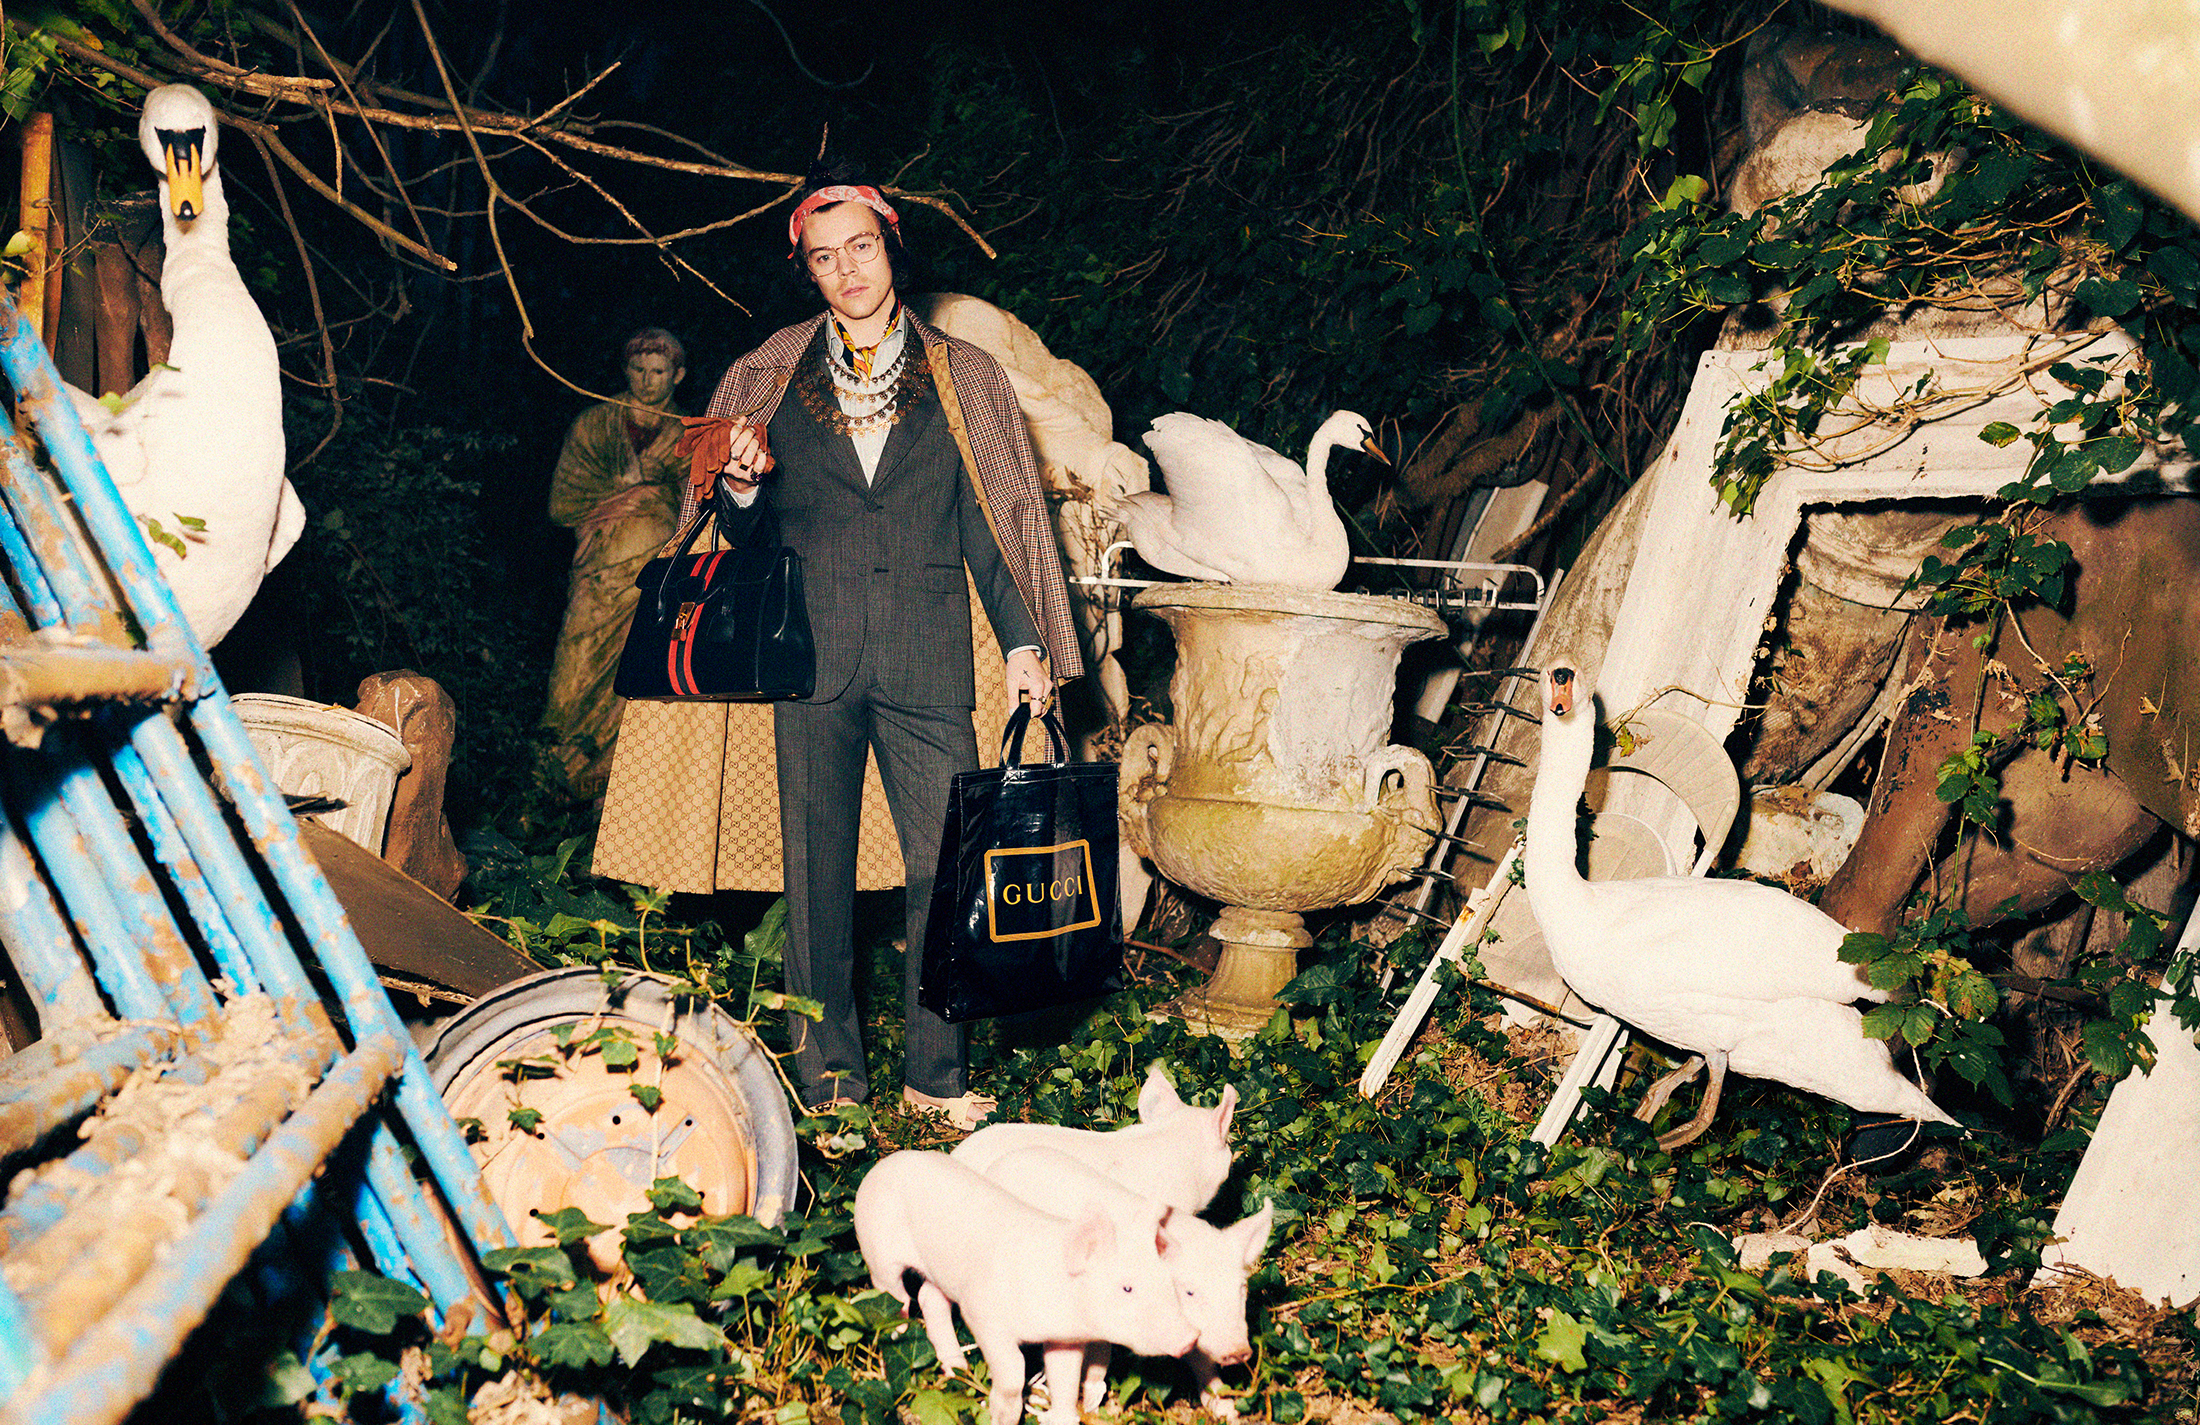 Gucci Pre-Fall 2019 Men’s Tailoring Campaign with Harry Styles